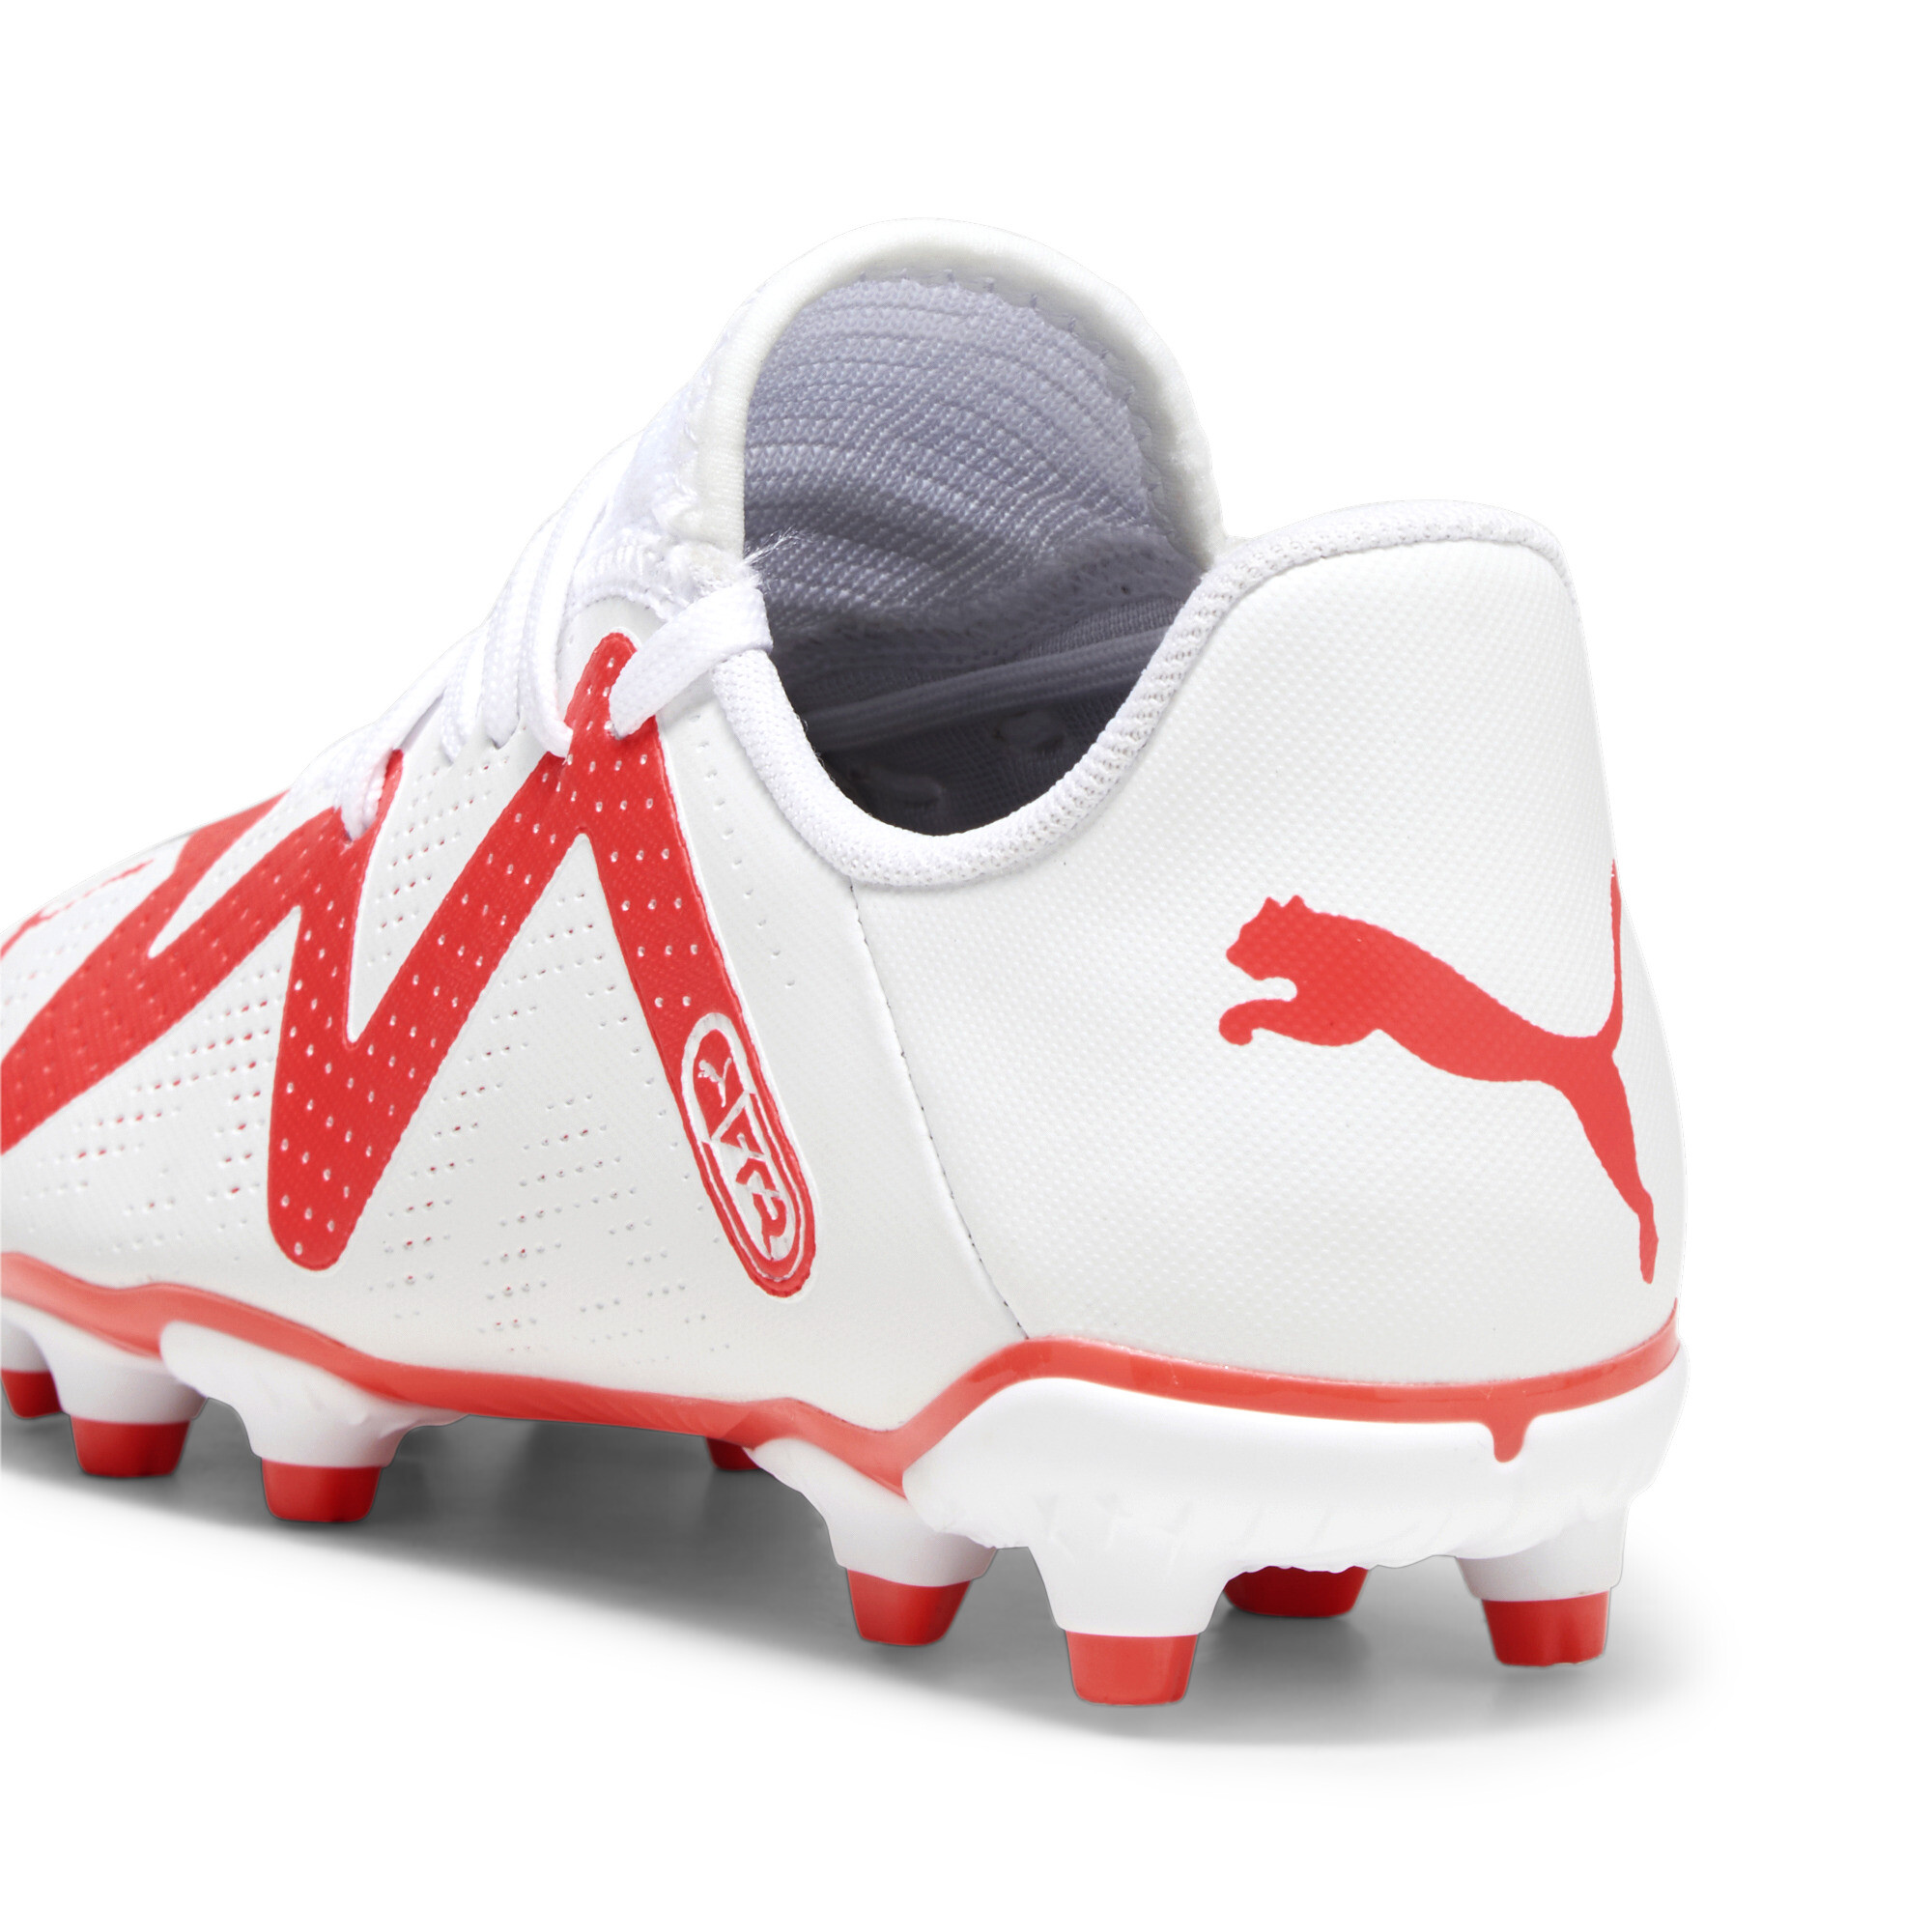 Puma FUTURE PLAY FG/AG Youth Football Boots, White, Size 37.5, Shoes